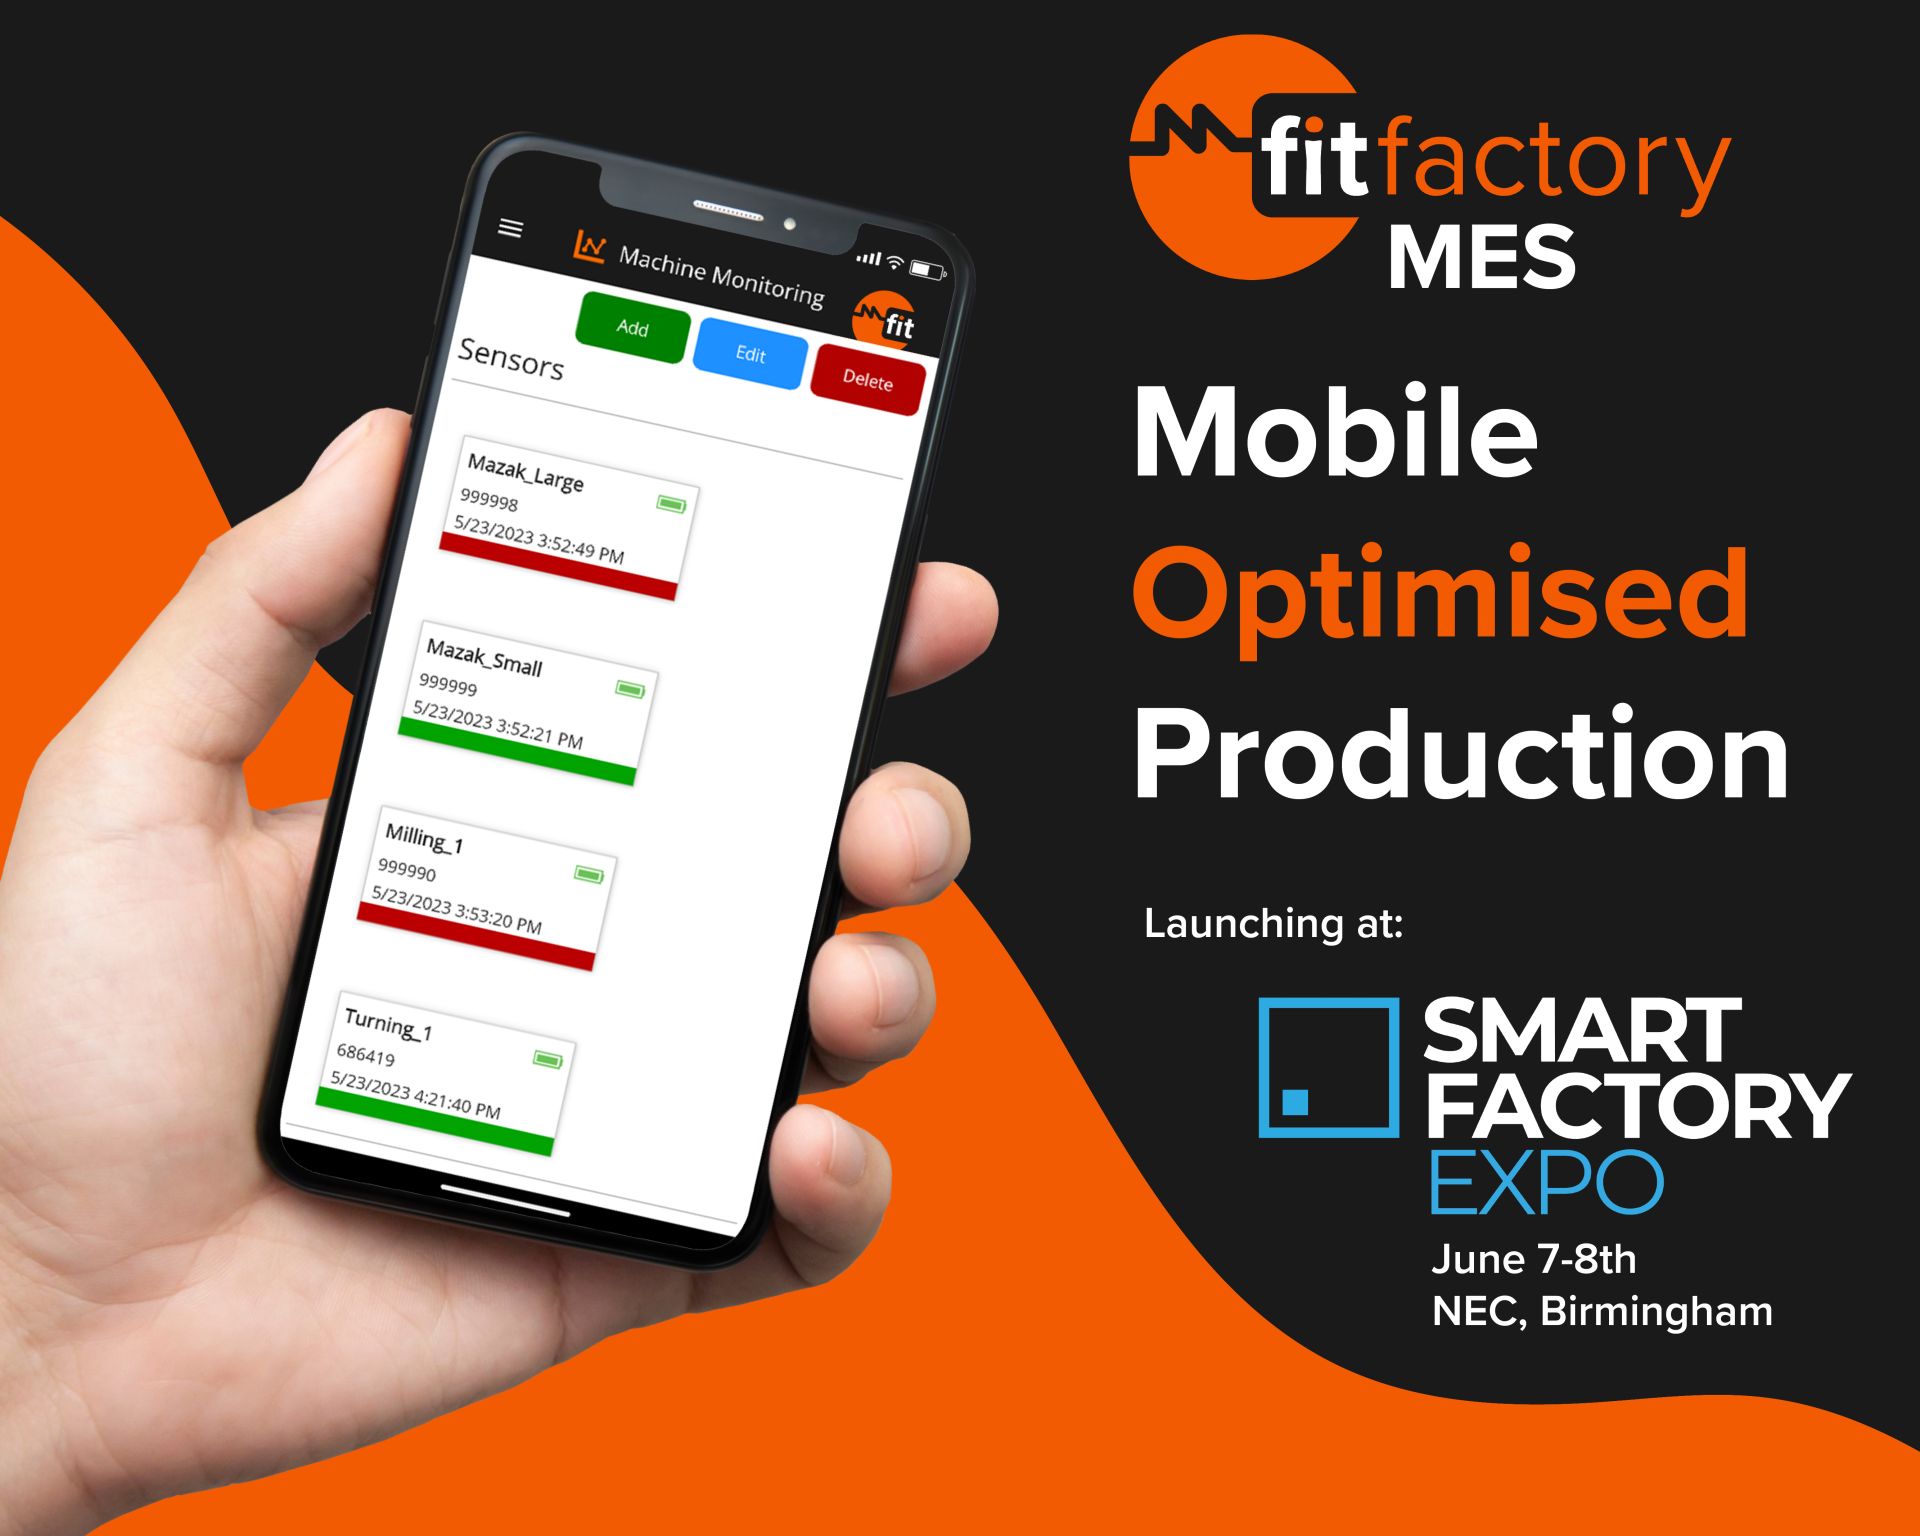 Fitfactory launch Next Generation MES app at Smart Factory